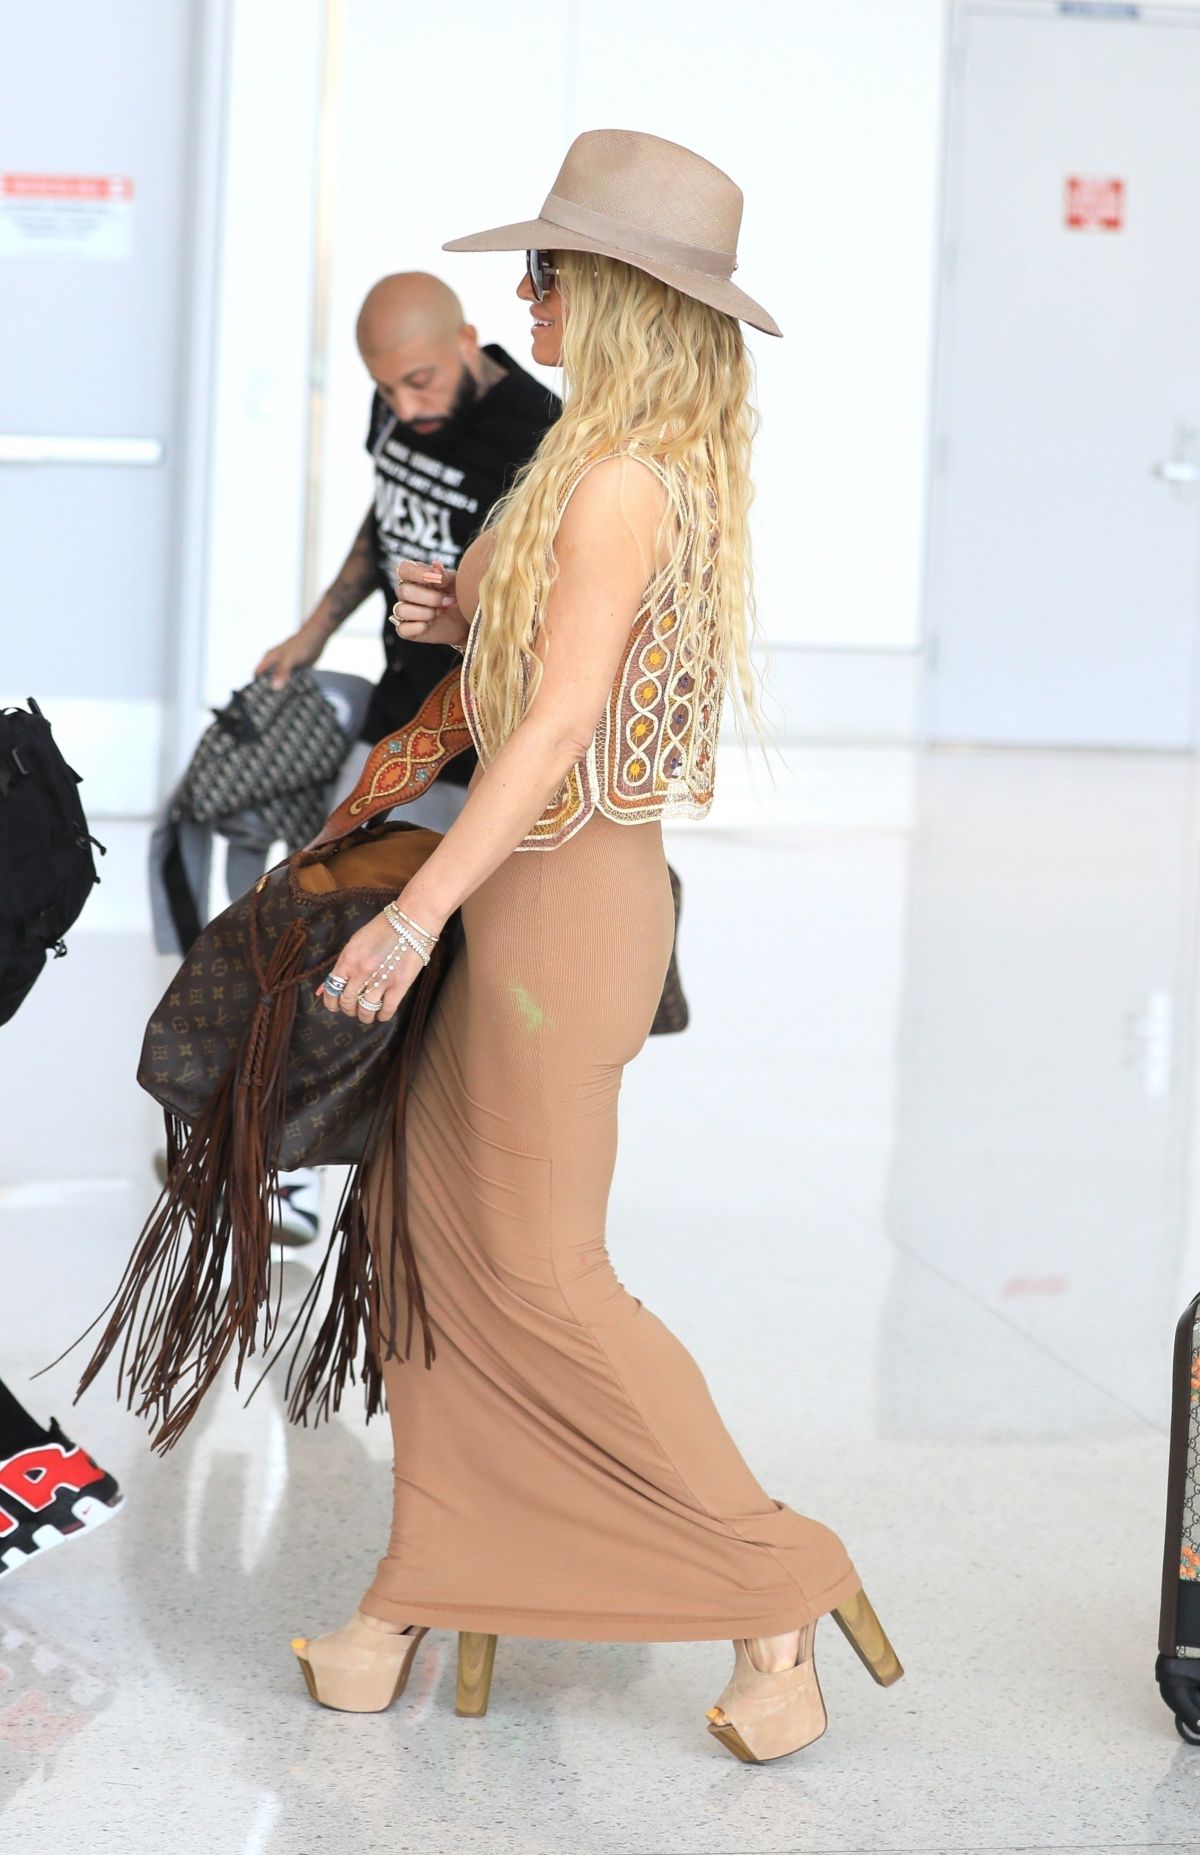 Jessica Simpson LAX Airport in Los Angeles January 4, 2007 – Star